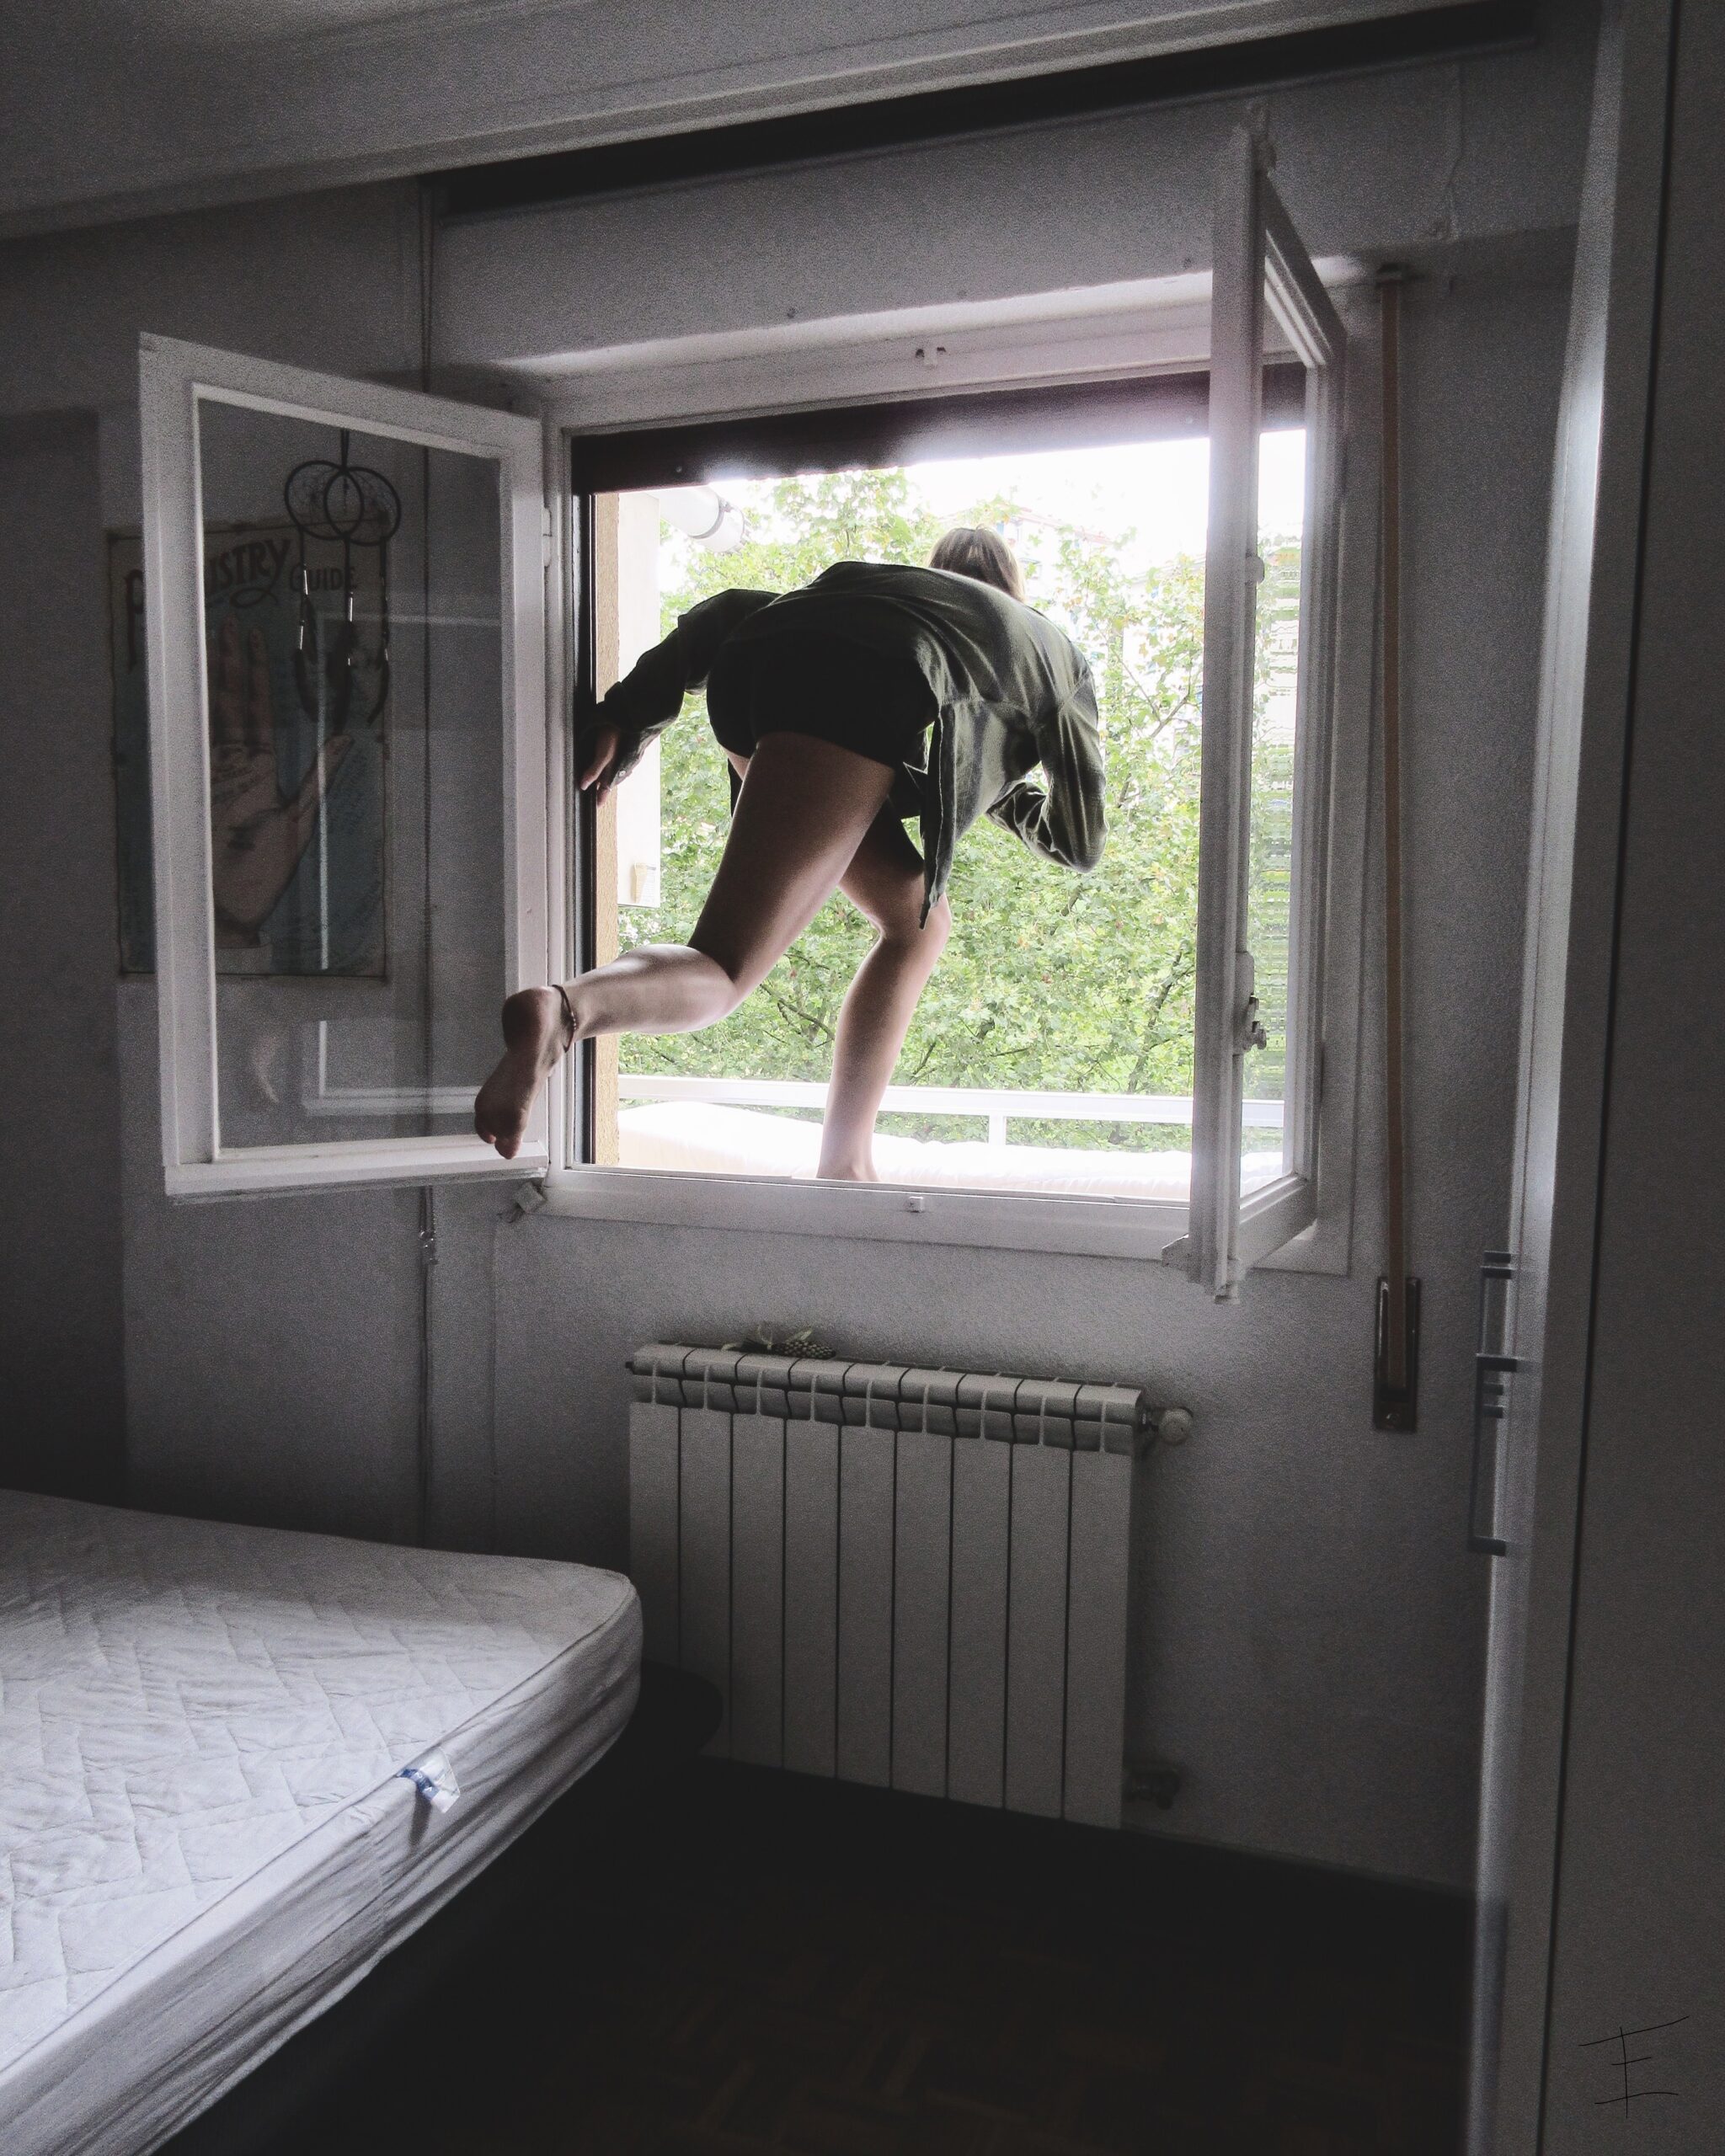 Emily is stepping on an open window ledge from a bedroom, as if she's about to lunge off into the outdoors.